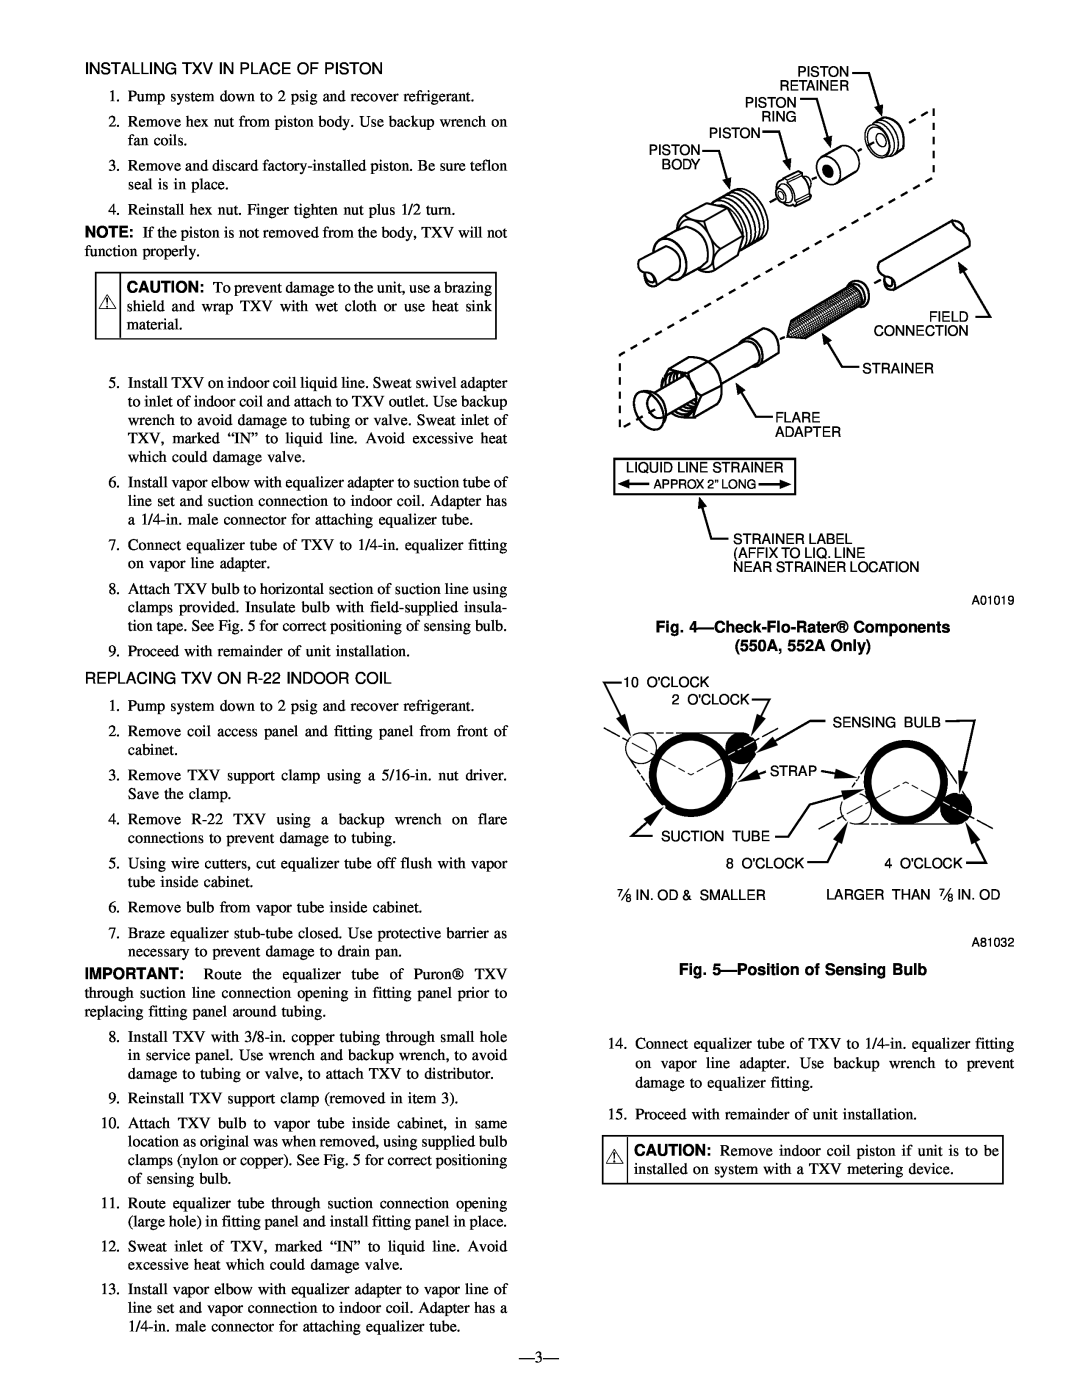 Bryant 556A instruction manual Check-Flo-RaterComponents 550A, 552A Only, Positionof Sensing Bulb 